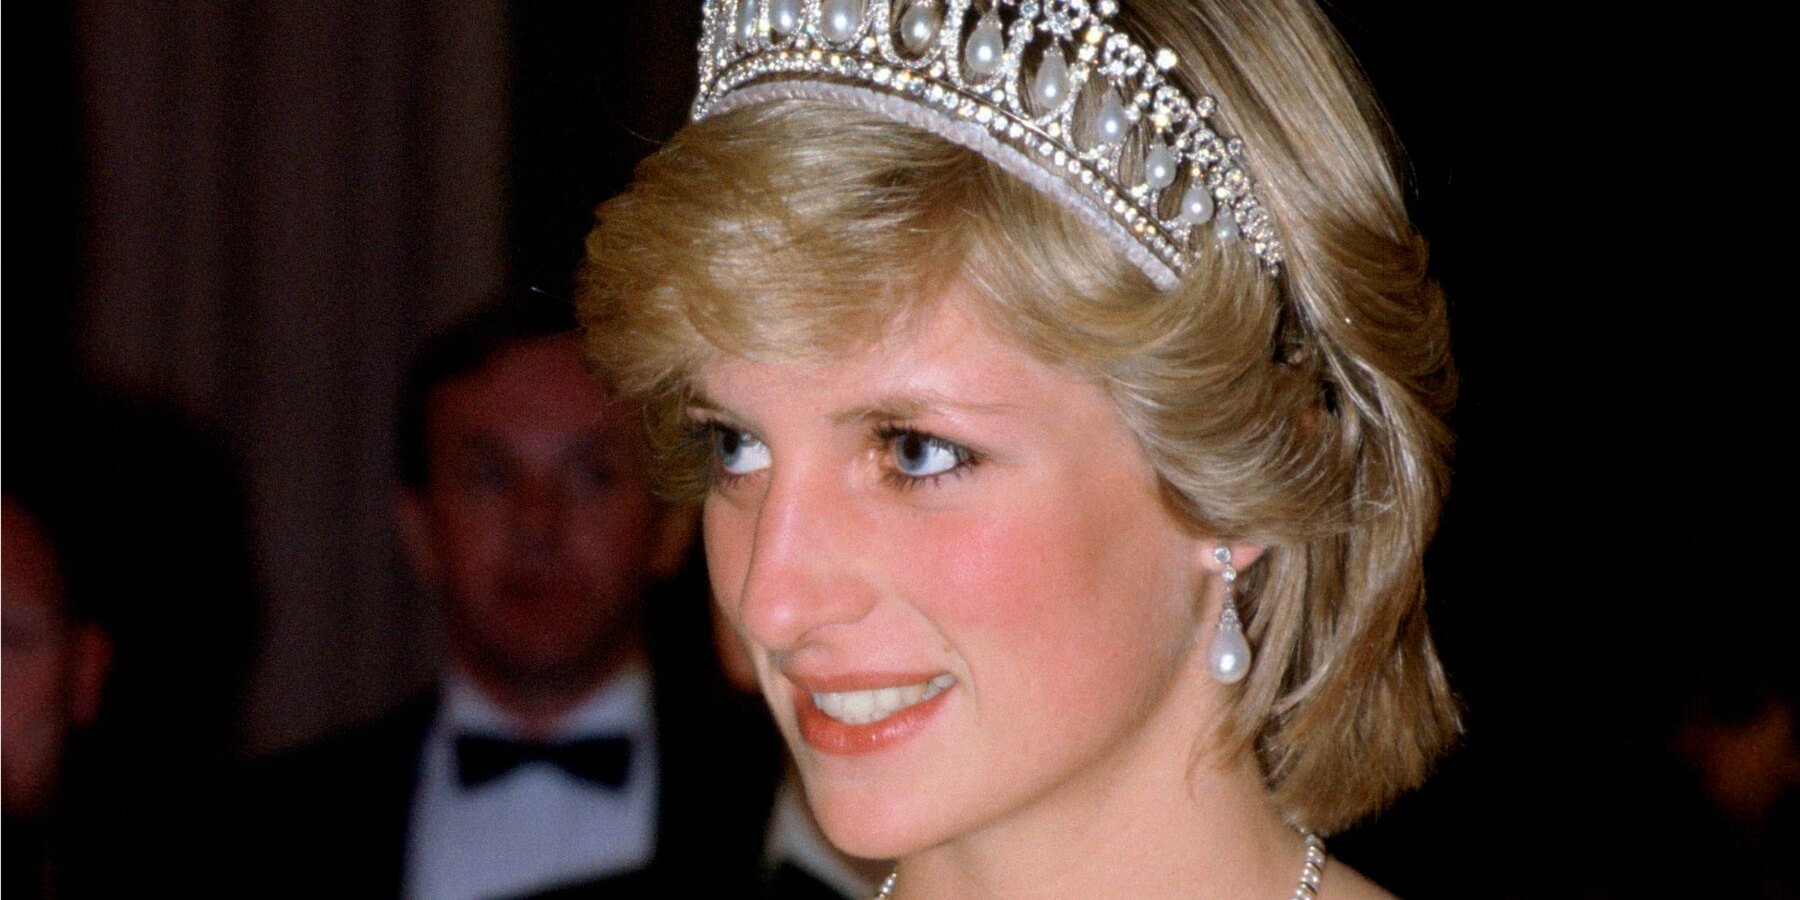 Princess Diana wears the Cambridge Lovers Knot tiara during an official state visit to Canada.